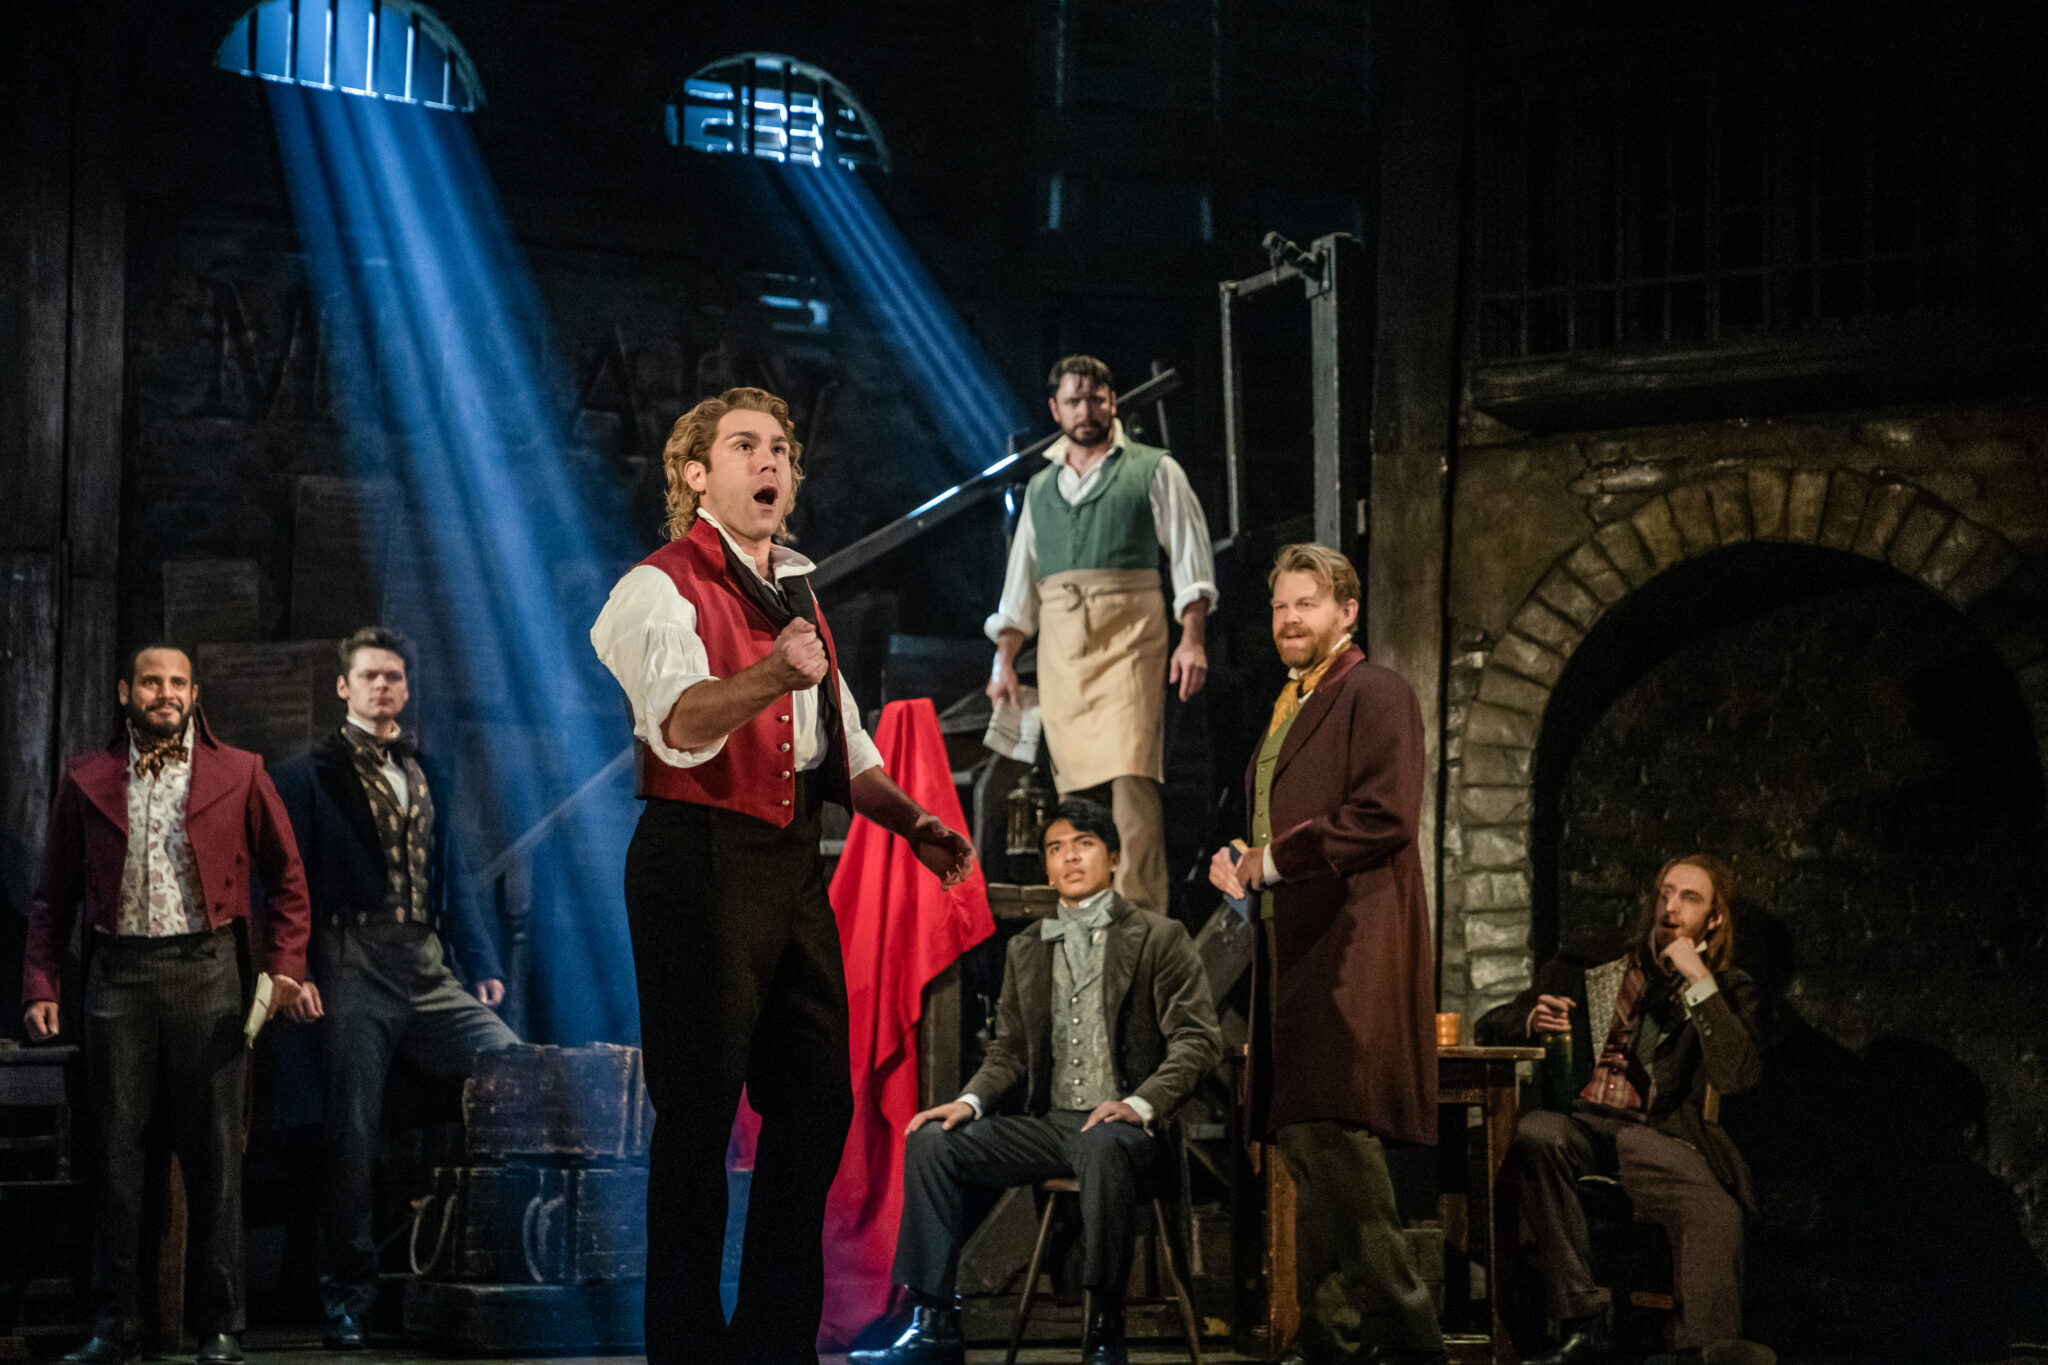 Les Misérables at PPAC A show you'll want to see 24601 times Motif